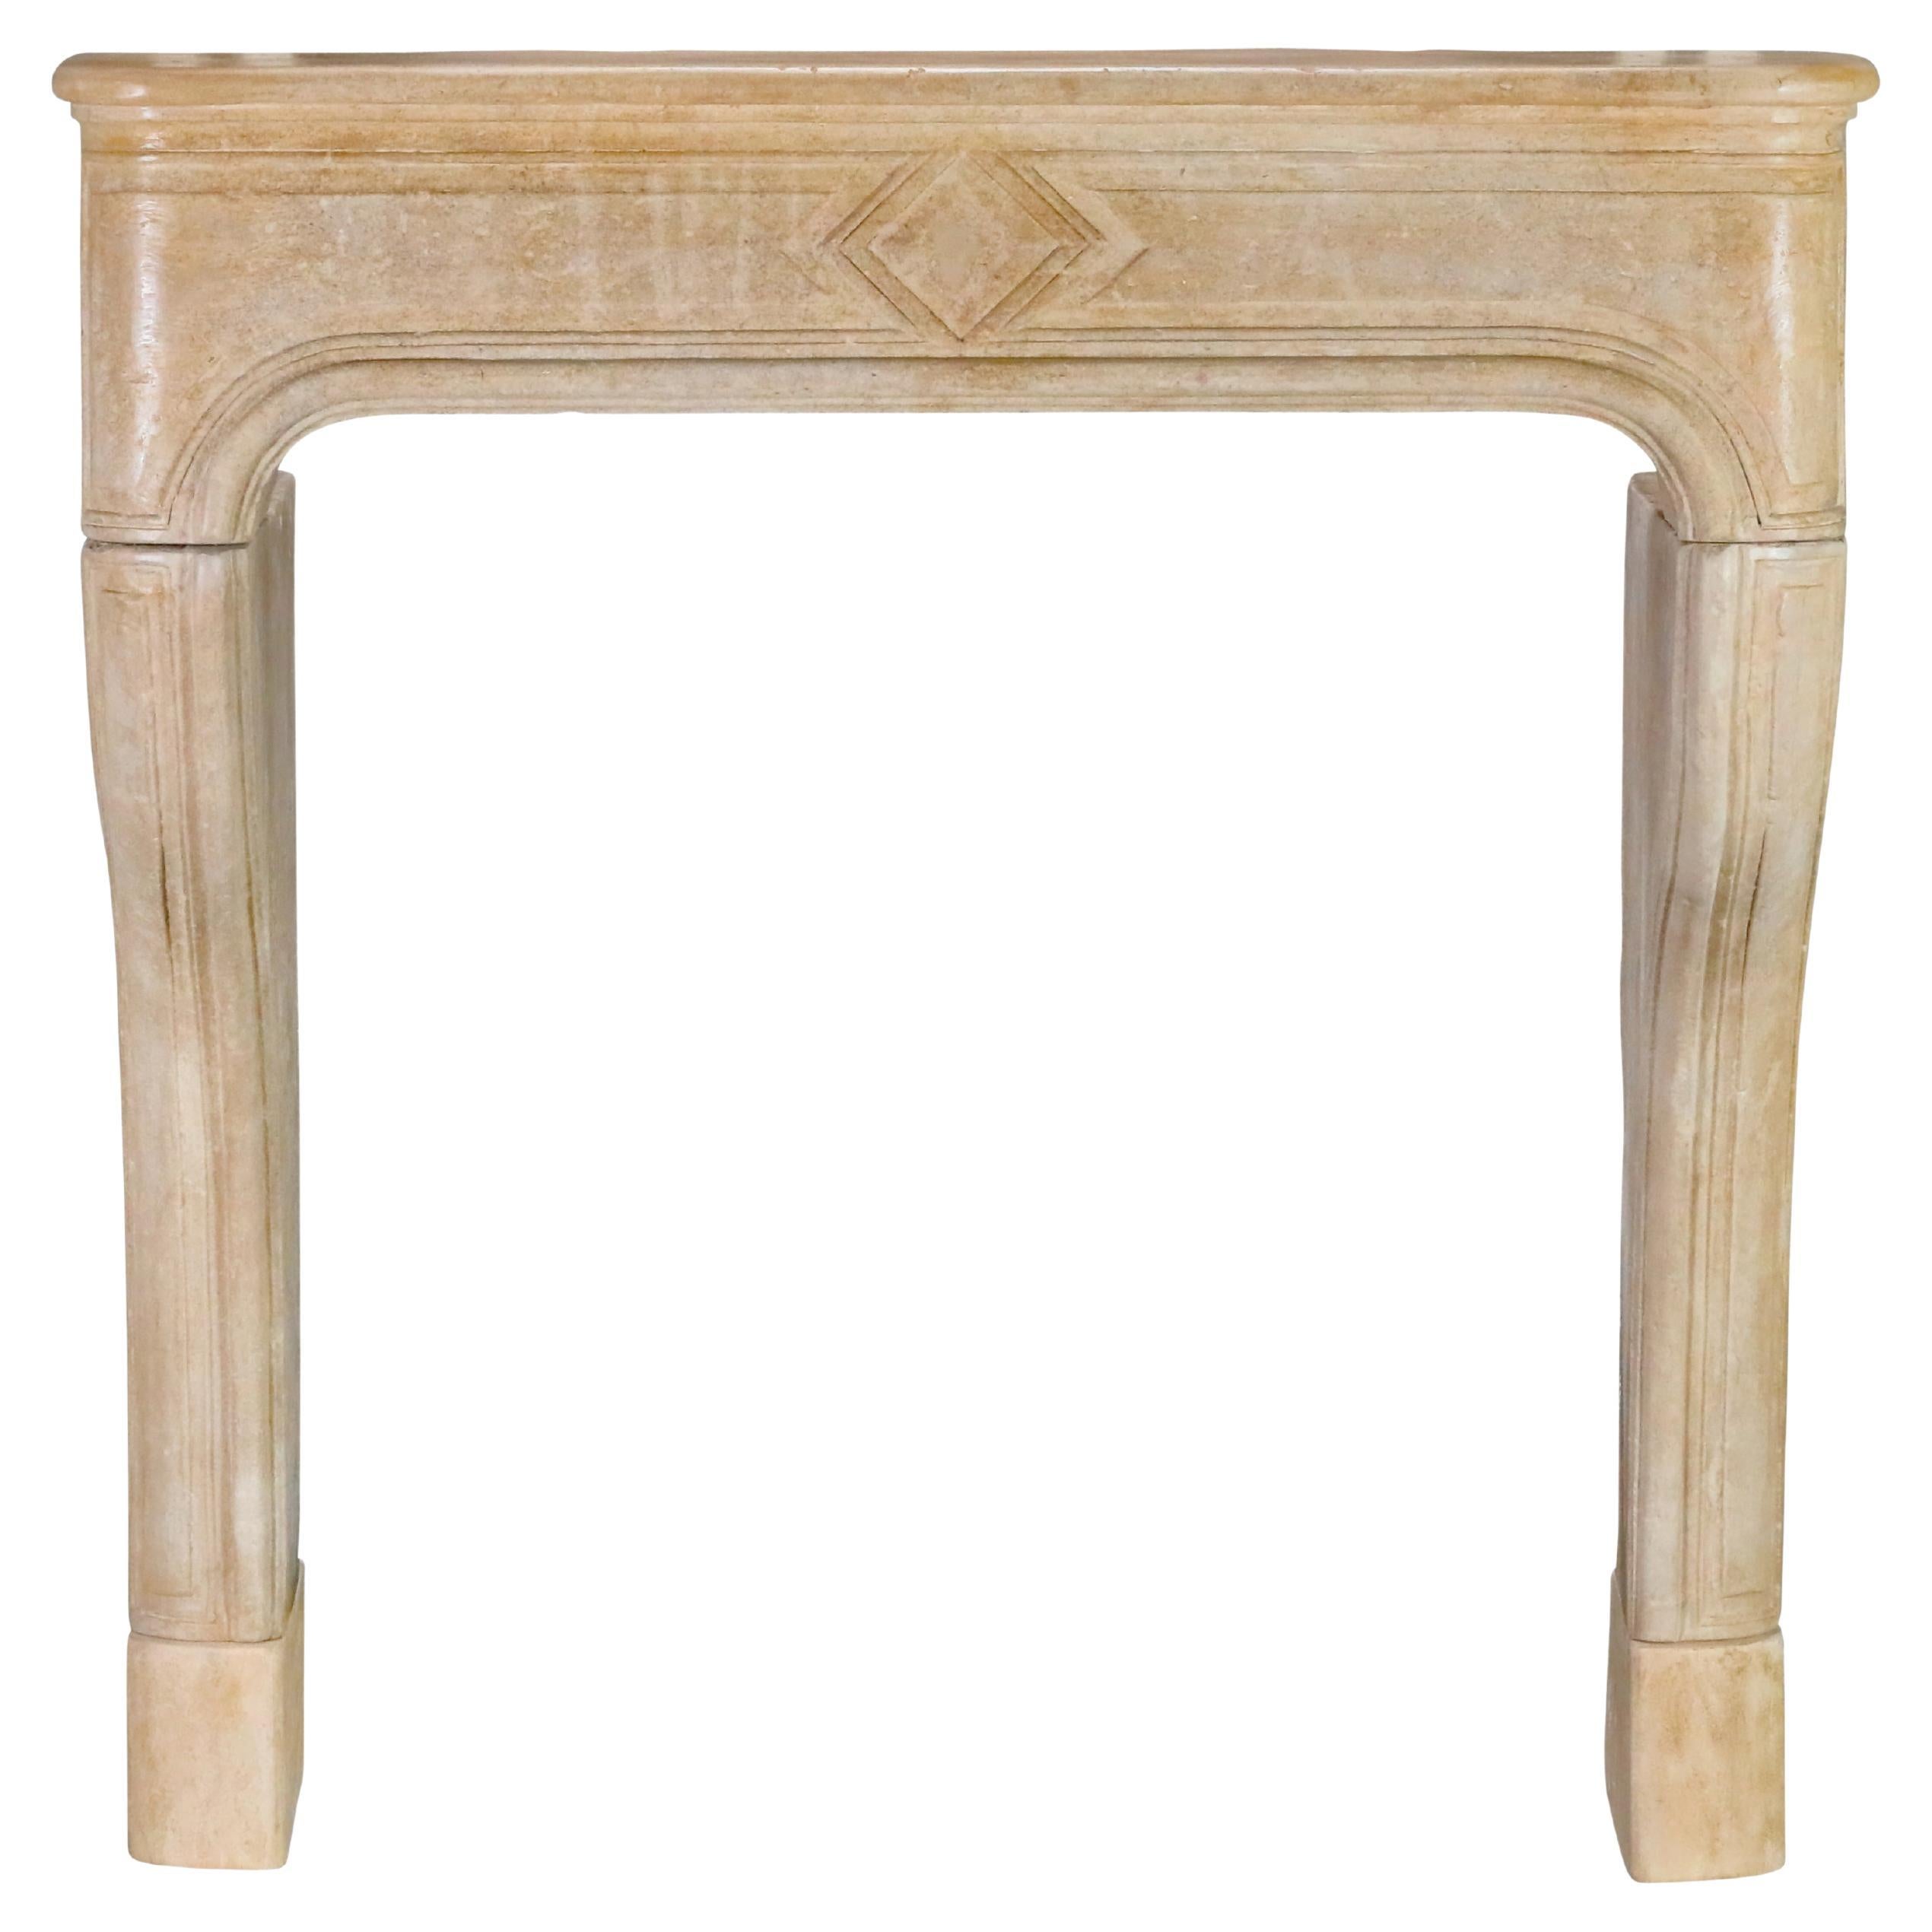 Rustic French Antique Reclaimed Extra Small Fireplace Surround In Limestone